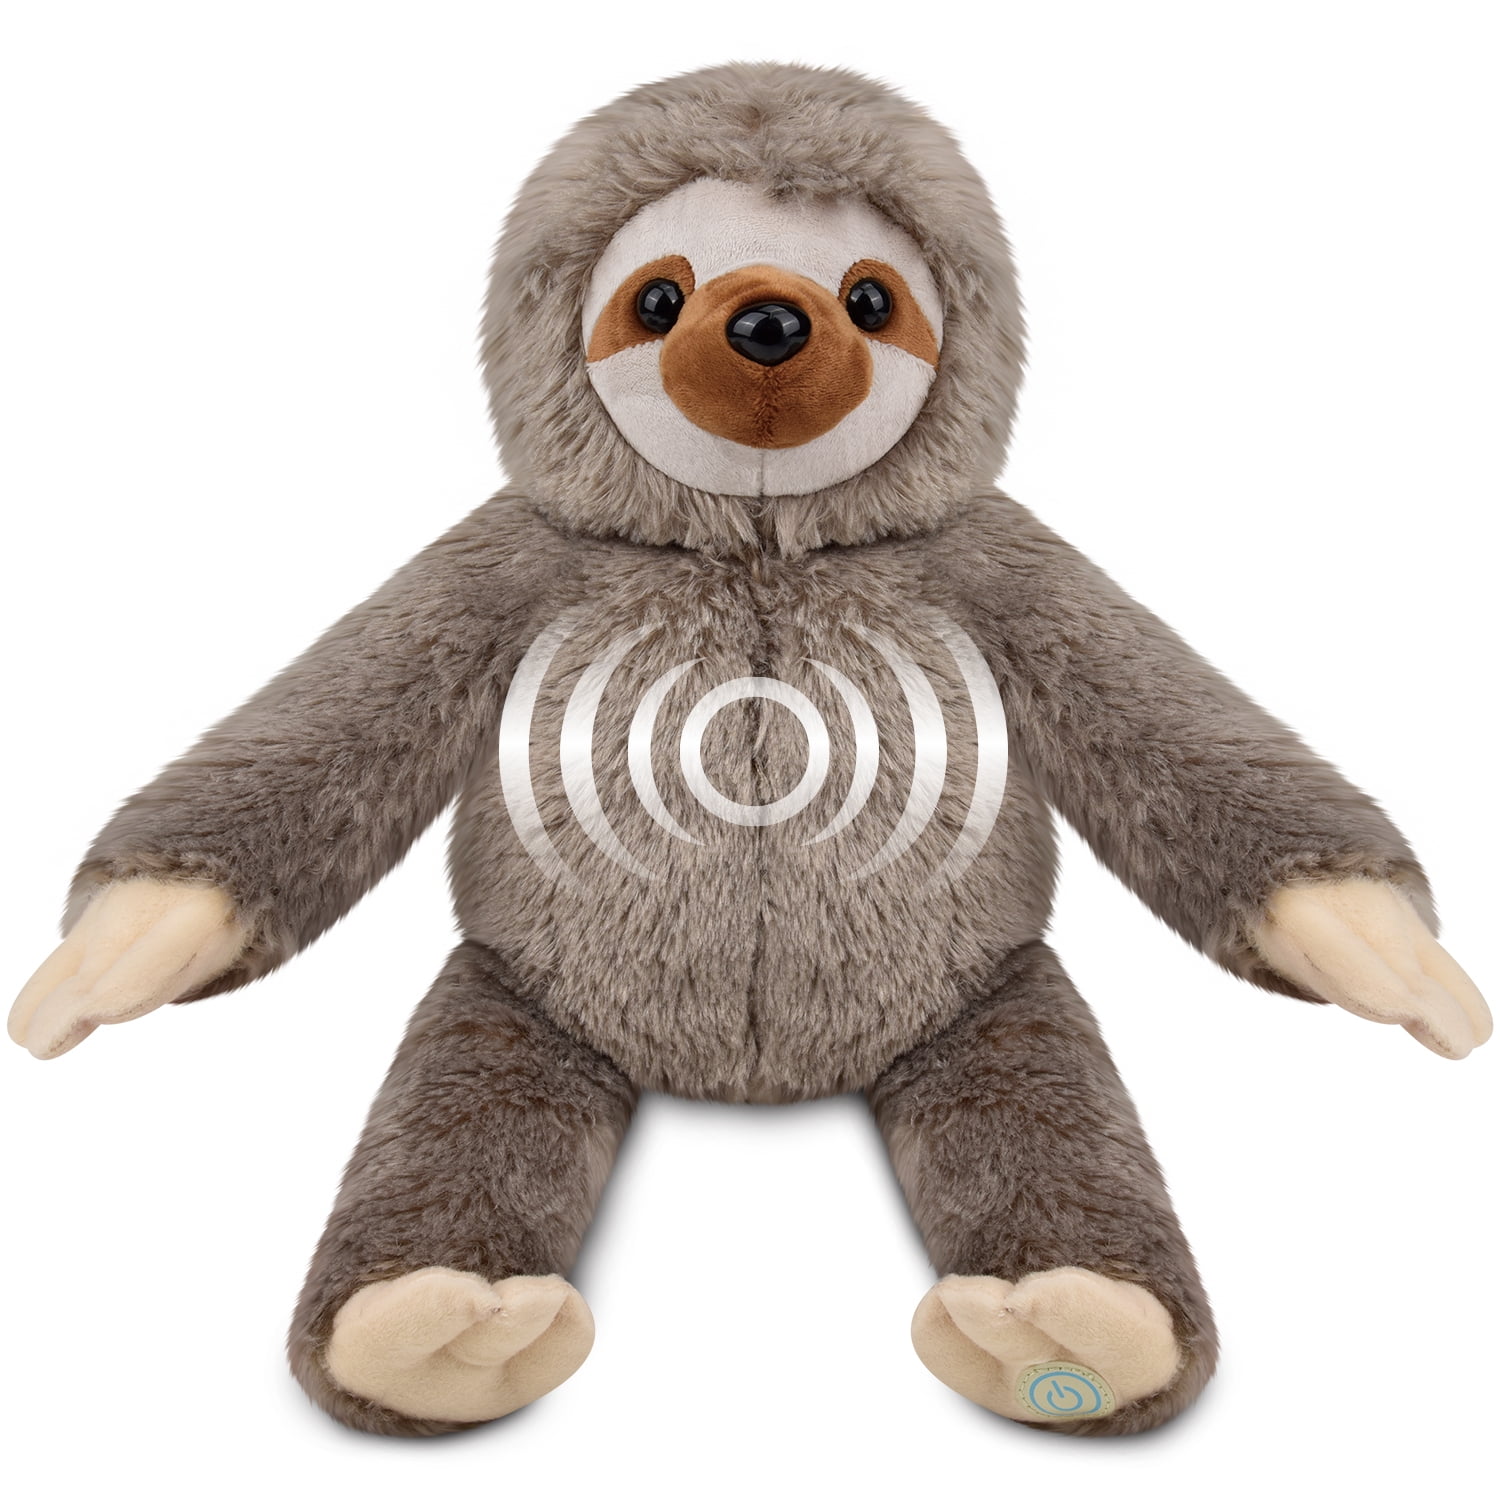 Leader Light Vibrating Plush SLOTH Soother Vibrates 14" Health Touch Huggable 